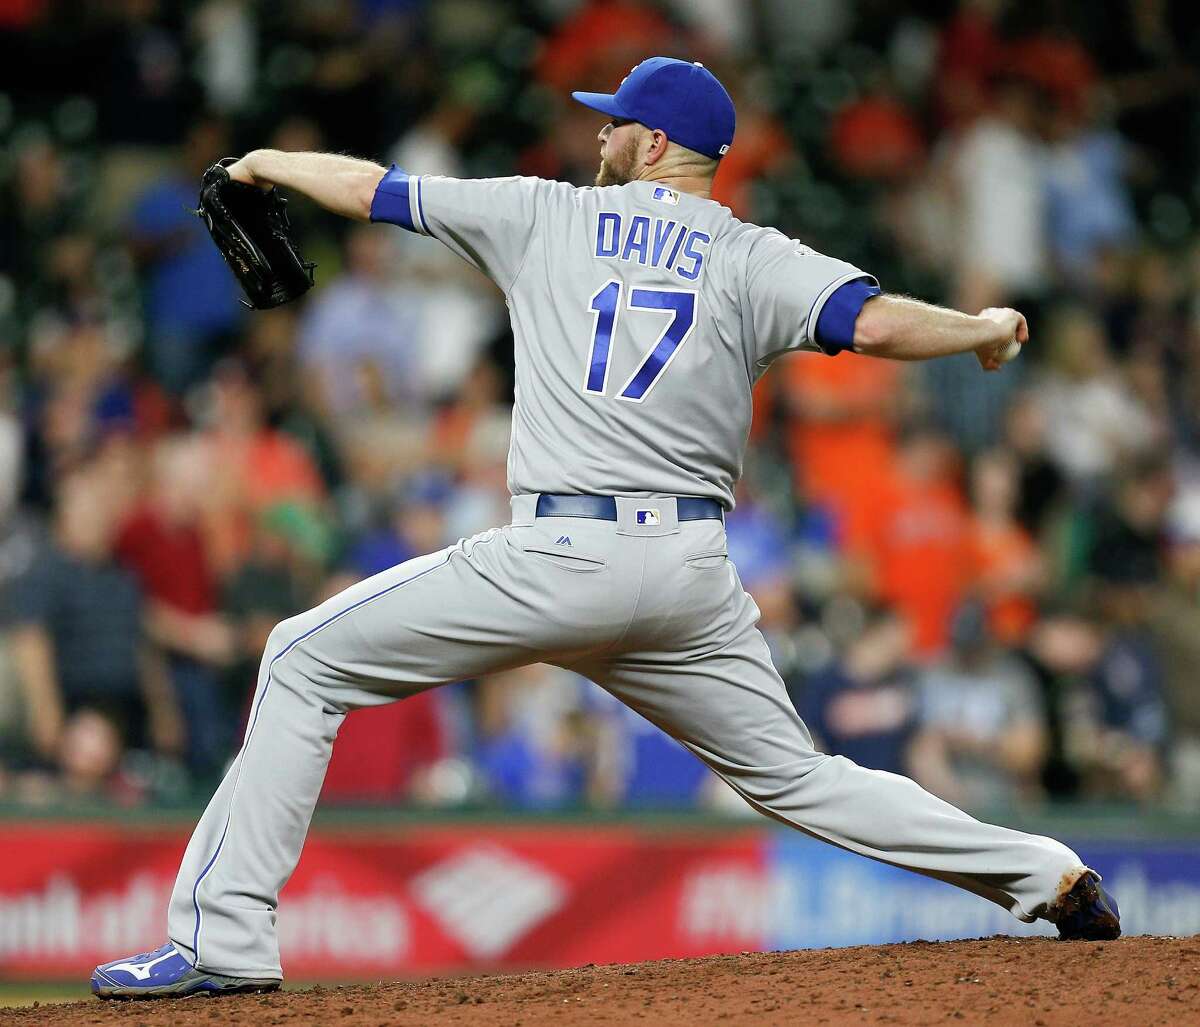 Wade Davis, closer The 32-year-old Davis is the best reliever on the market, which means he's automatically being mentioned as someone in who the Astros are interested. After saving 27 games for the Royals in 2016, Davis had 32 saves with the Cubs this season.